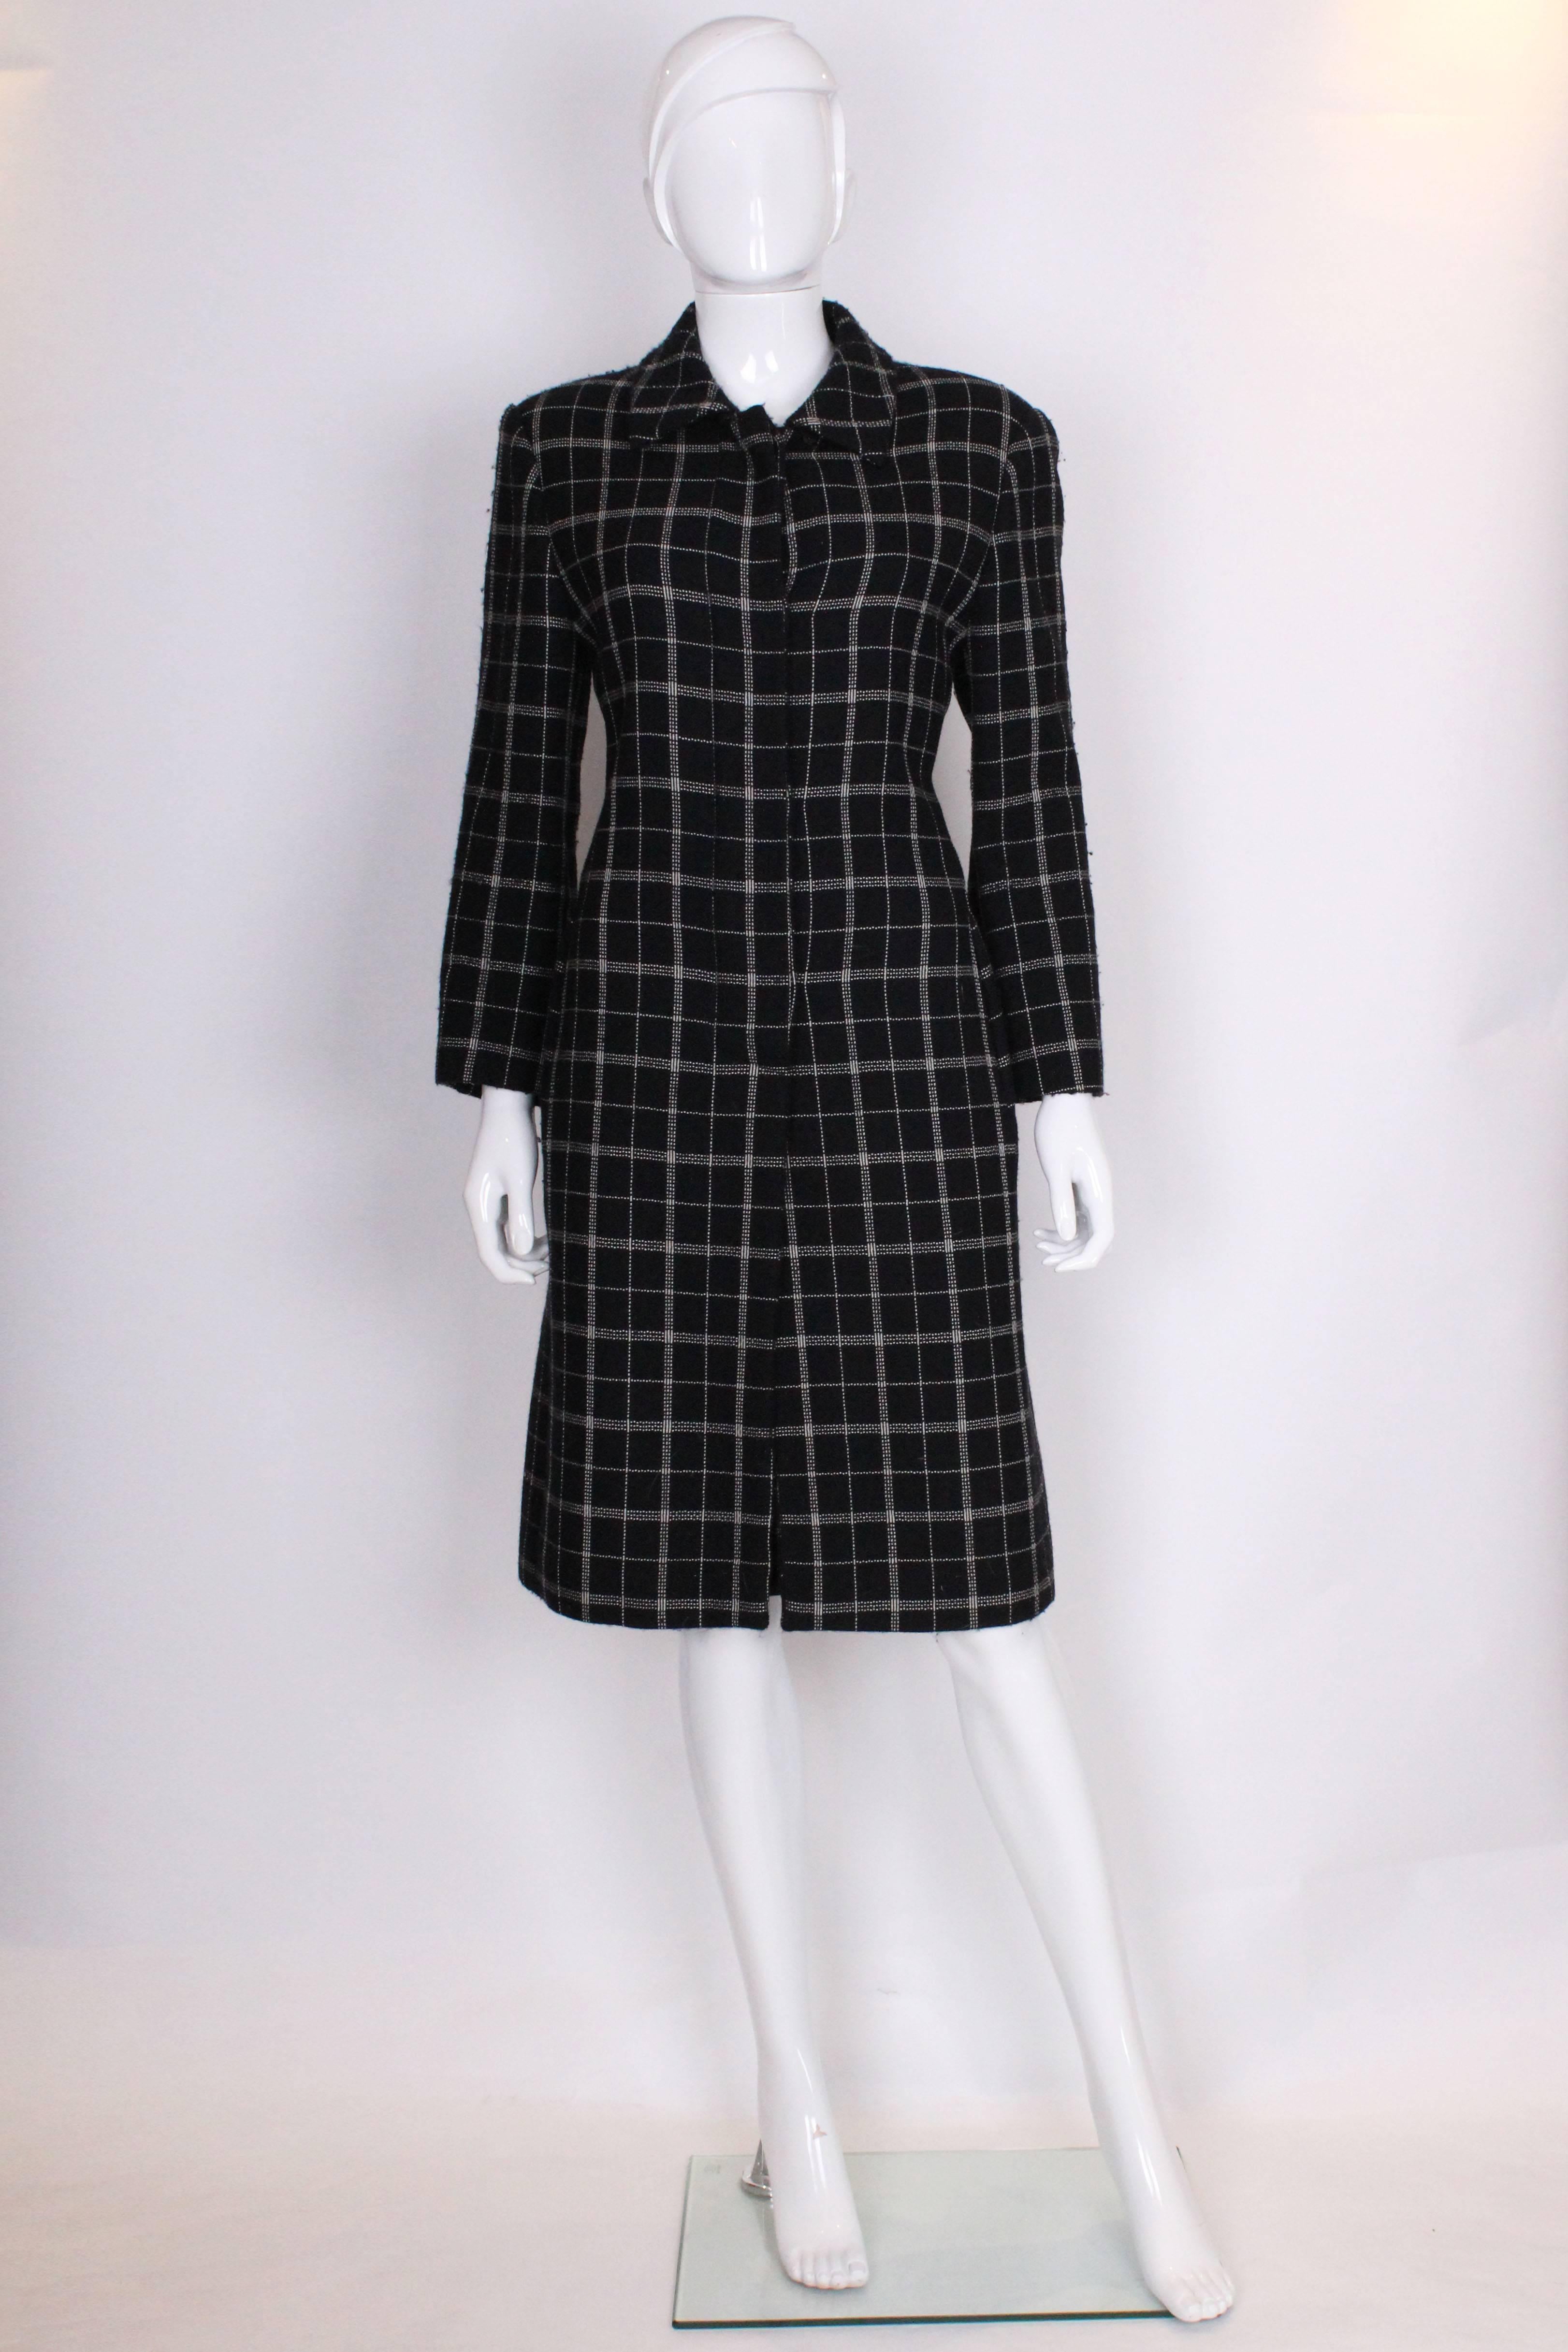 A chic and easy to wear coat by Oleg Cassini Couture.The coat has a black background with a white line pattern, horizontal and vertical.It has a 4 button closure ,is unlined , has a vent at the back and a pocket on each side.